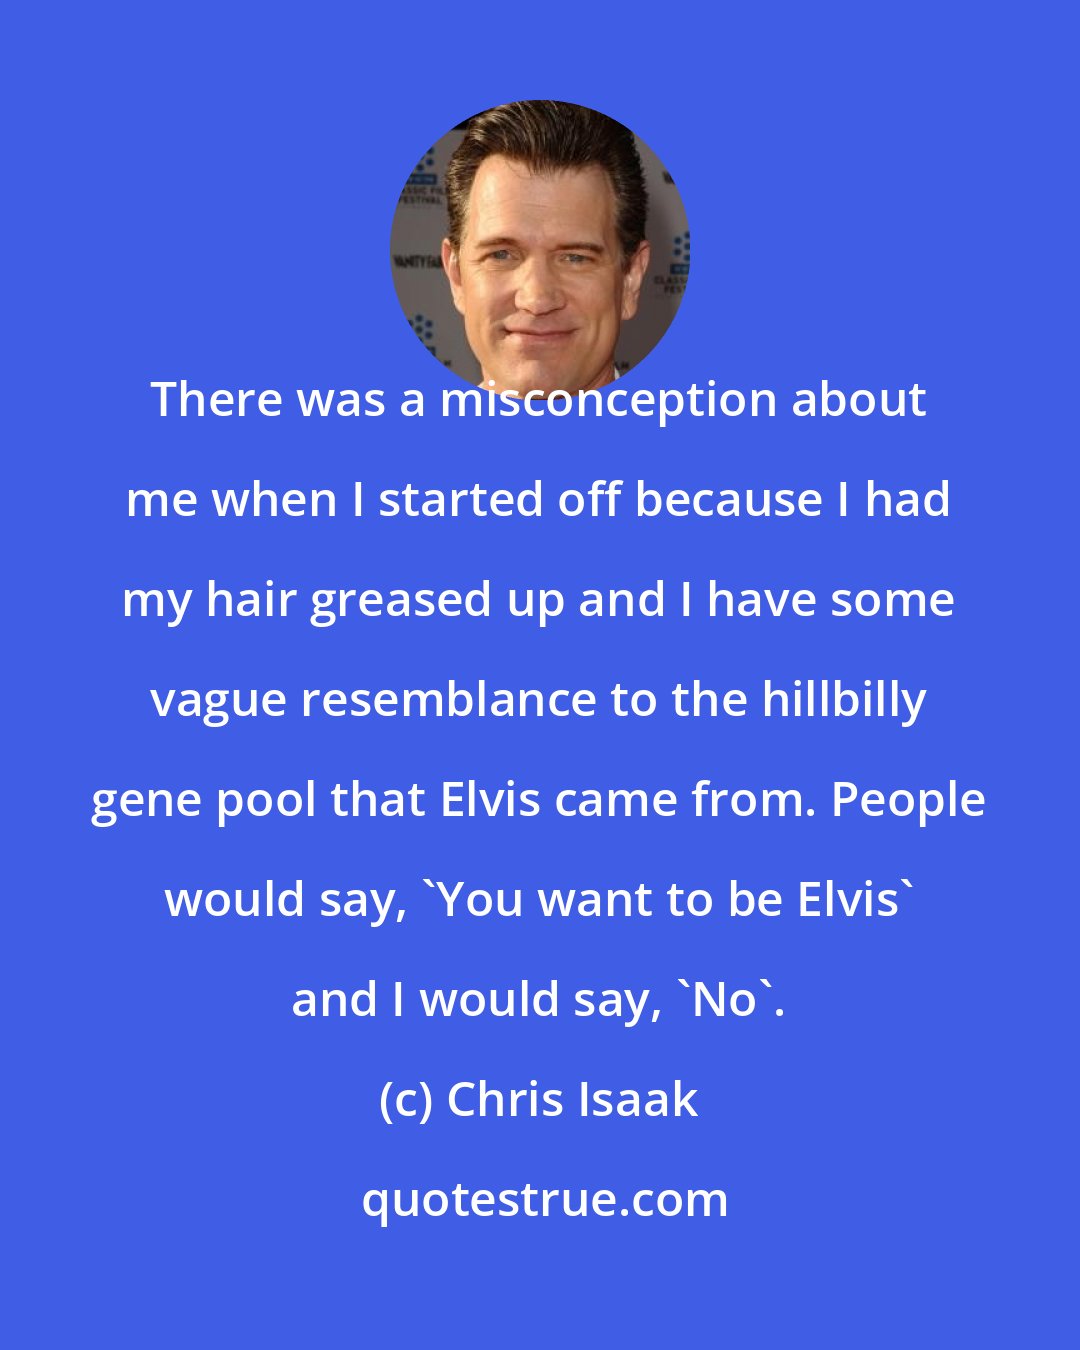 Chris Isaak: There was a misconception about me when I started off because I had my hair greased up and I have some vague resemblance to the hillbilly gene pool that Elvis came from. People would say, 'You want to be Elvis' and I would say, 'No'.